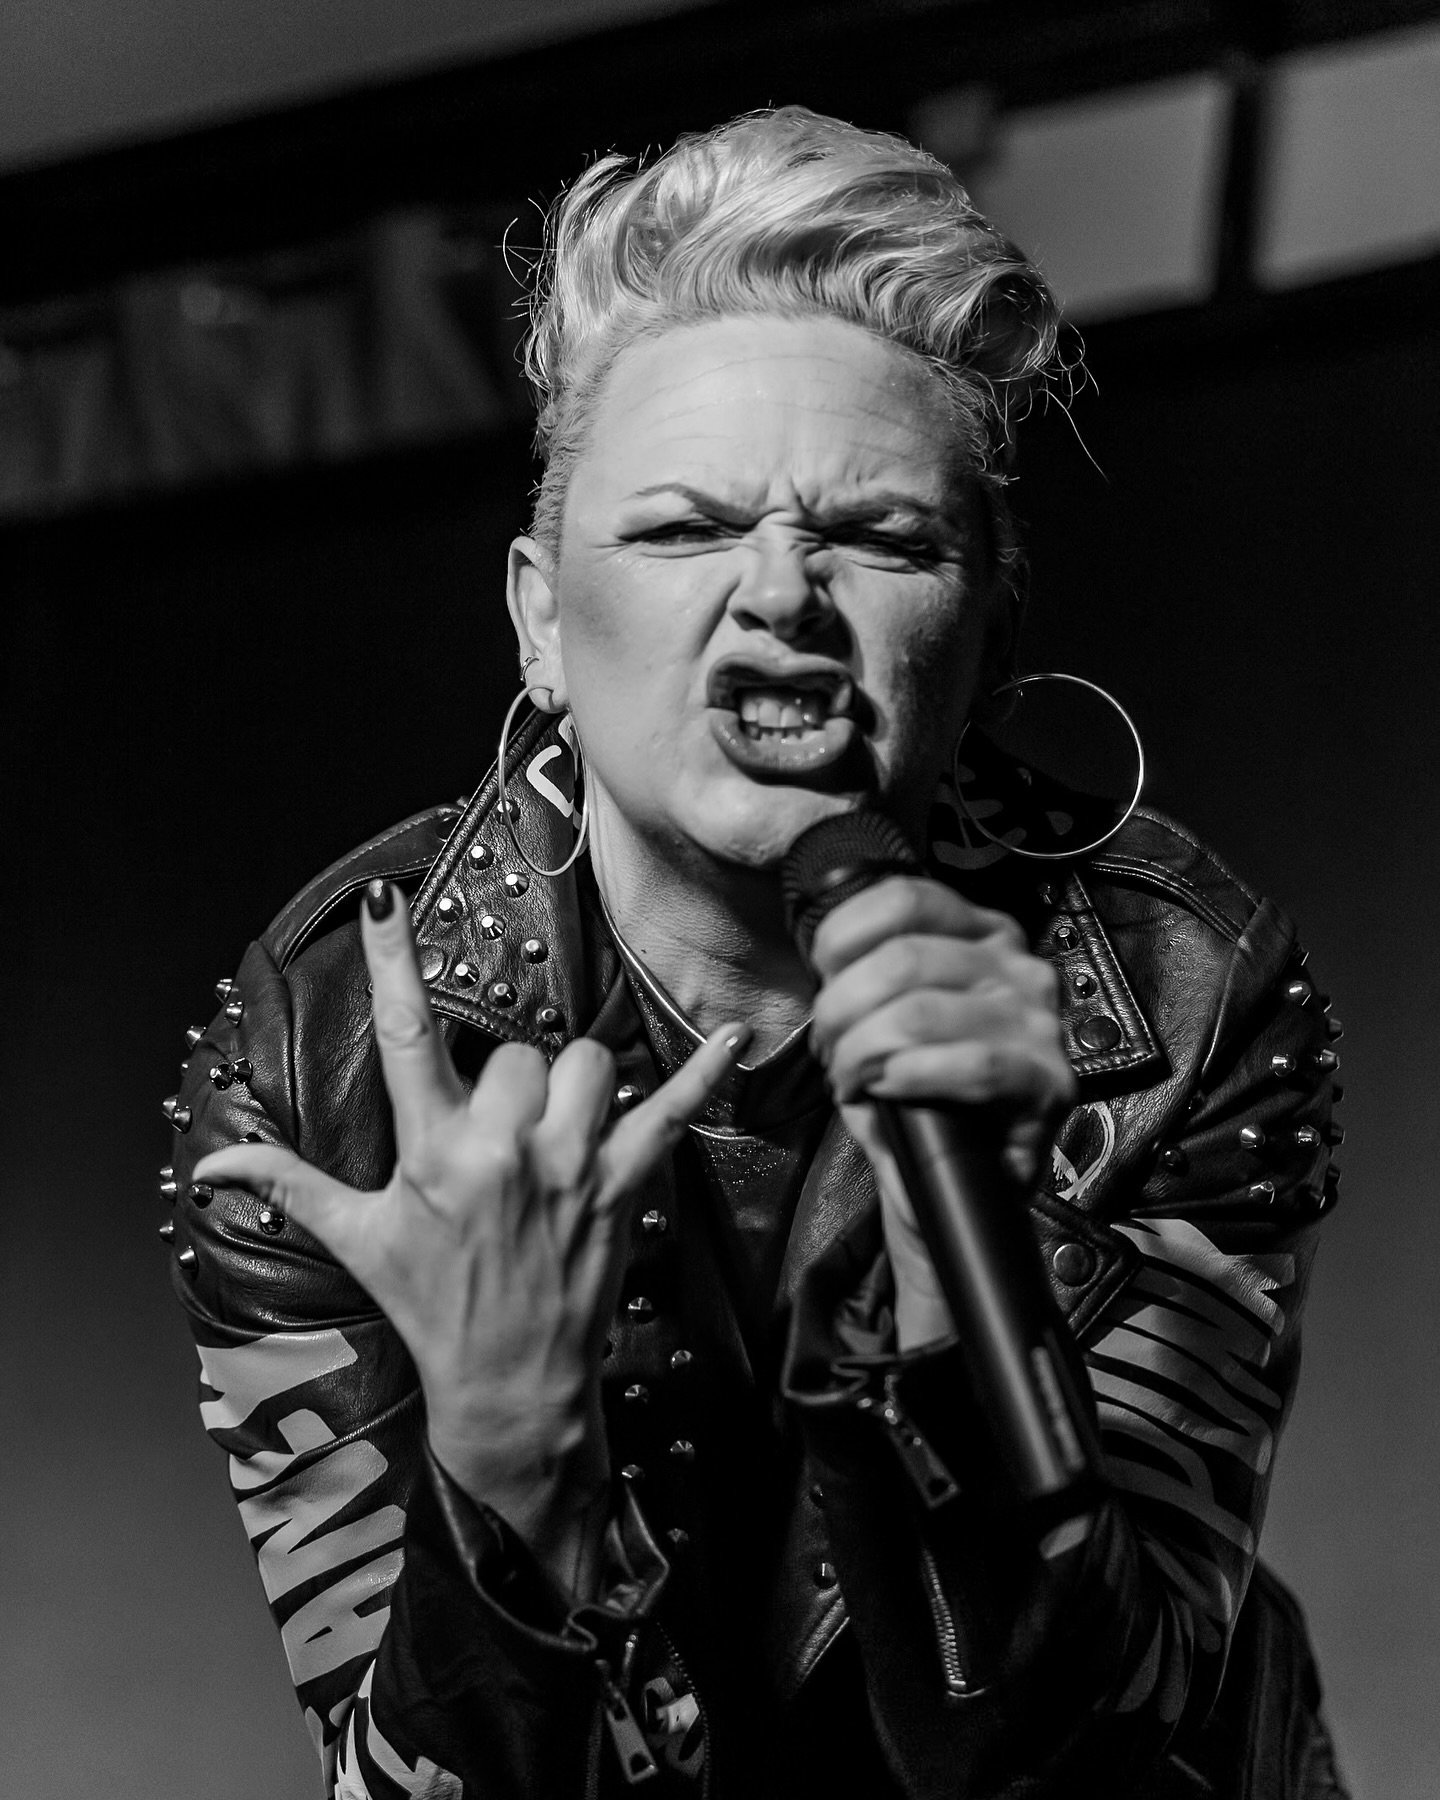 Another one from last weekend's 
&quot;So what!! Shake it off!! Show&quot;

Pink tribute. (So so good!!) 

Meet: @singseegersing 

#livemusic #livemusicphotography #musicartist #pink #checkherout #greatnight #niagaraonthelake #eventphotography #chang